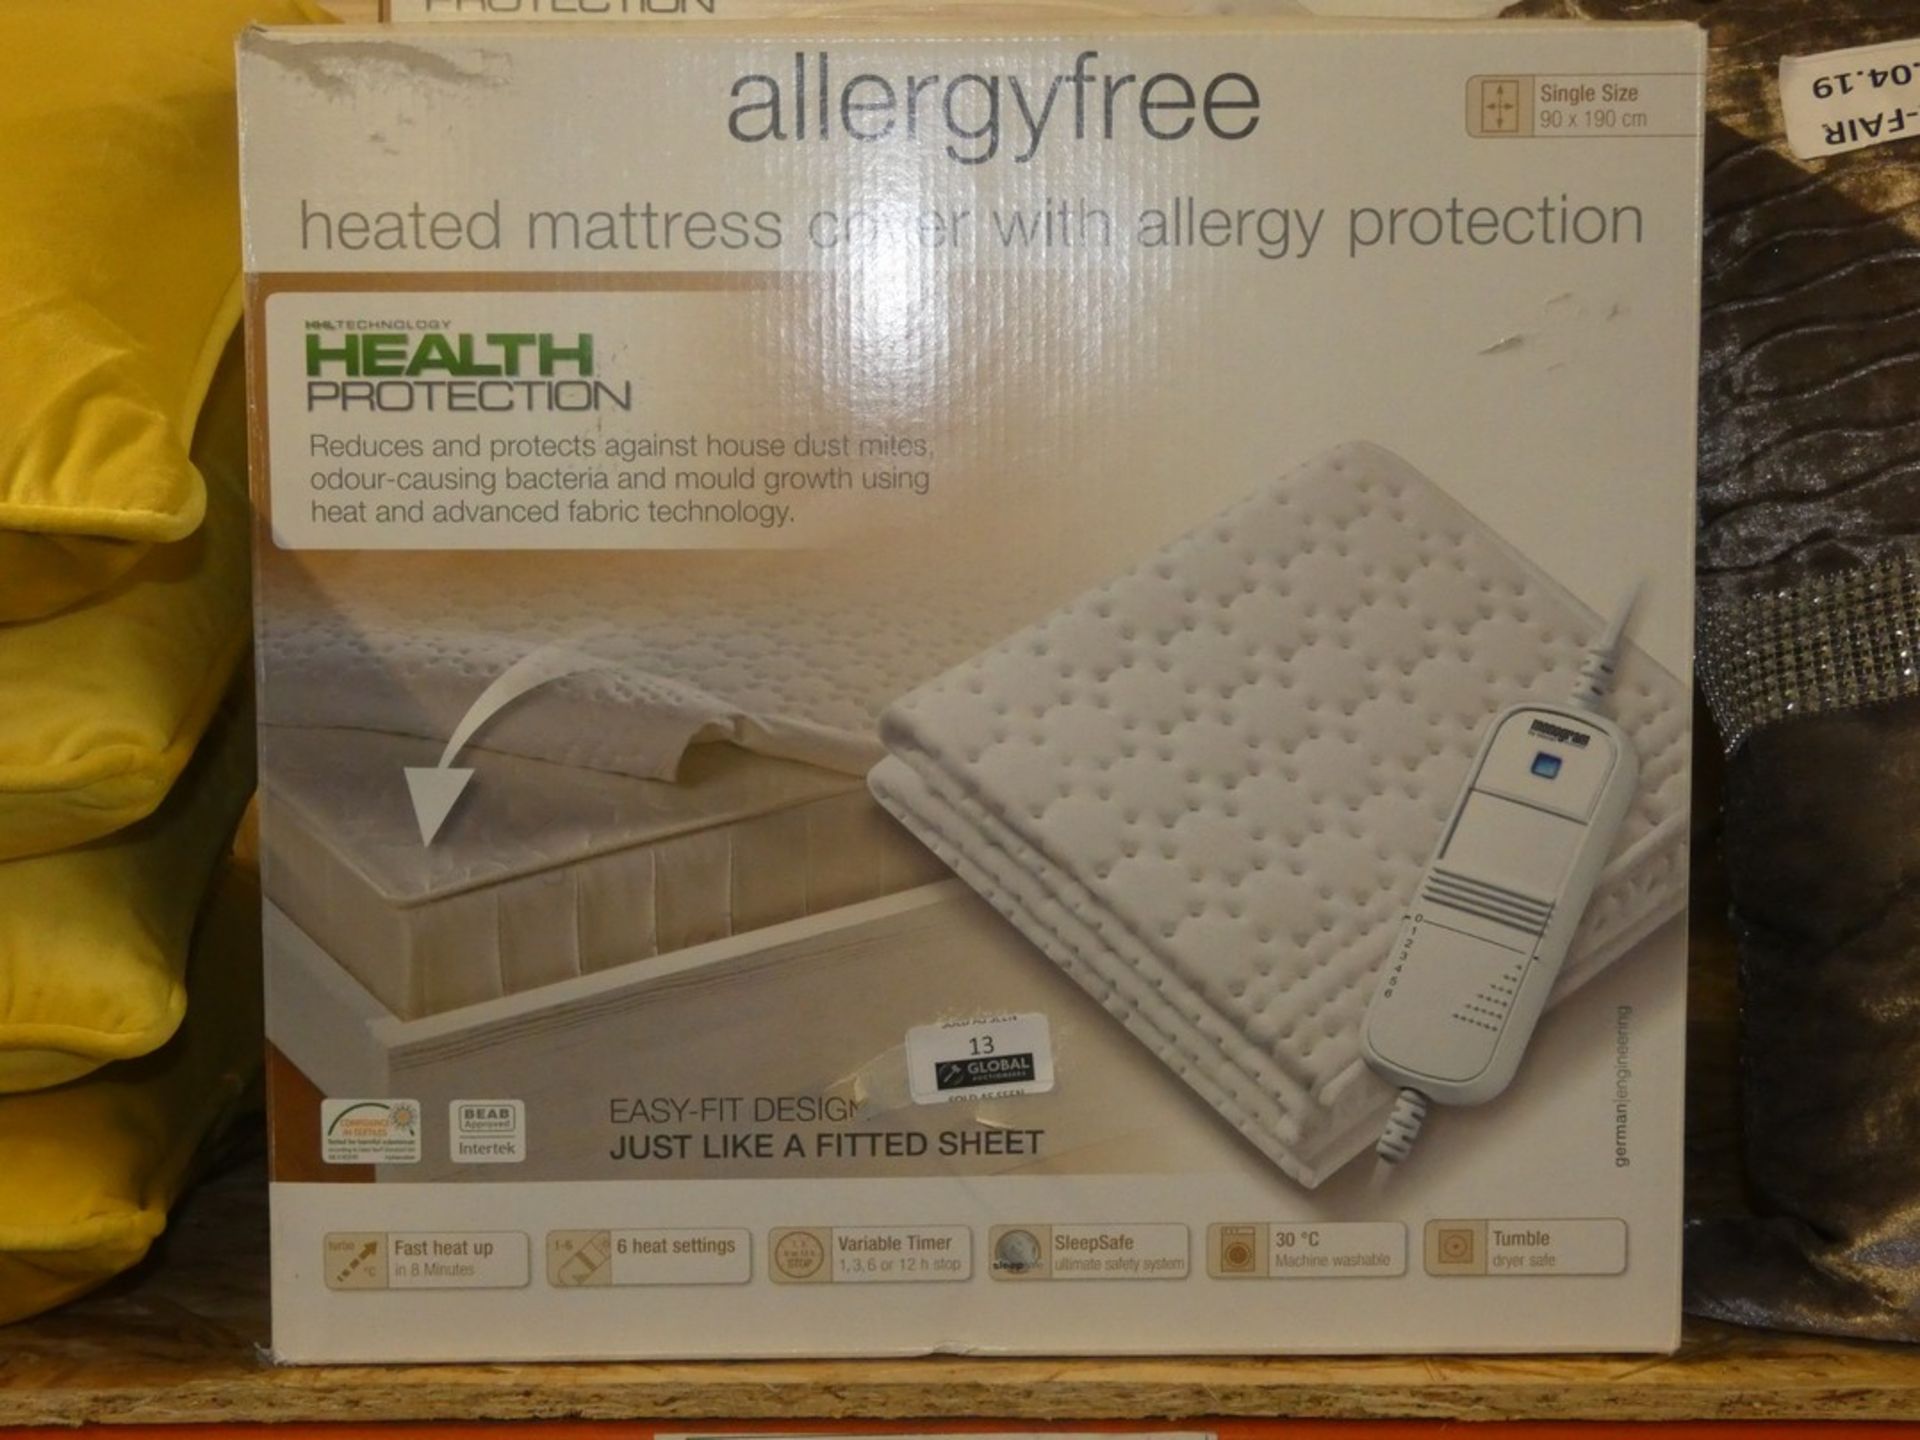 Lot to Contain 2 Boxed Monogram Allergy Free Mattress Covers with Allergy Protection Combined RRP £